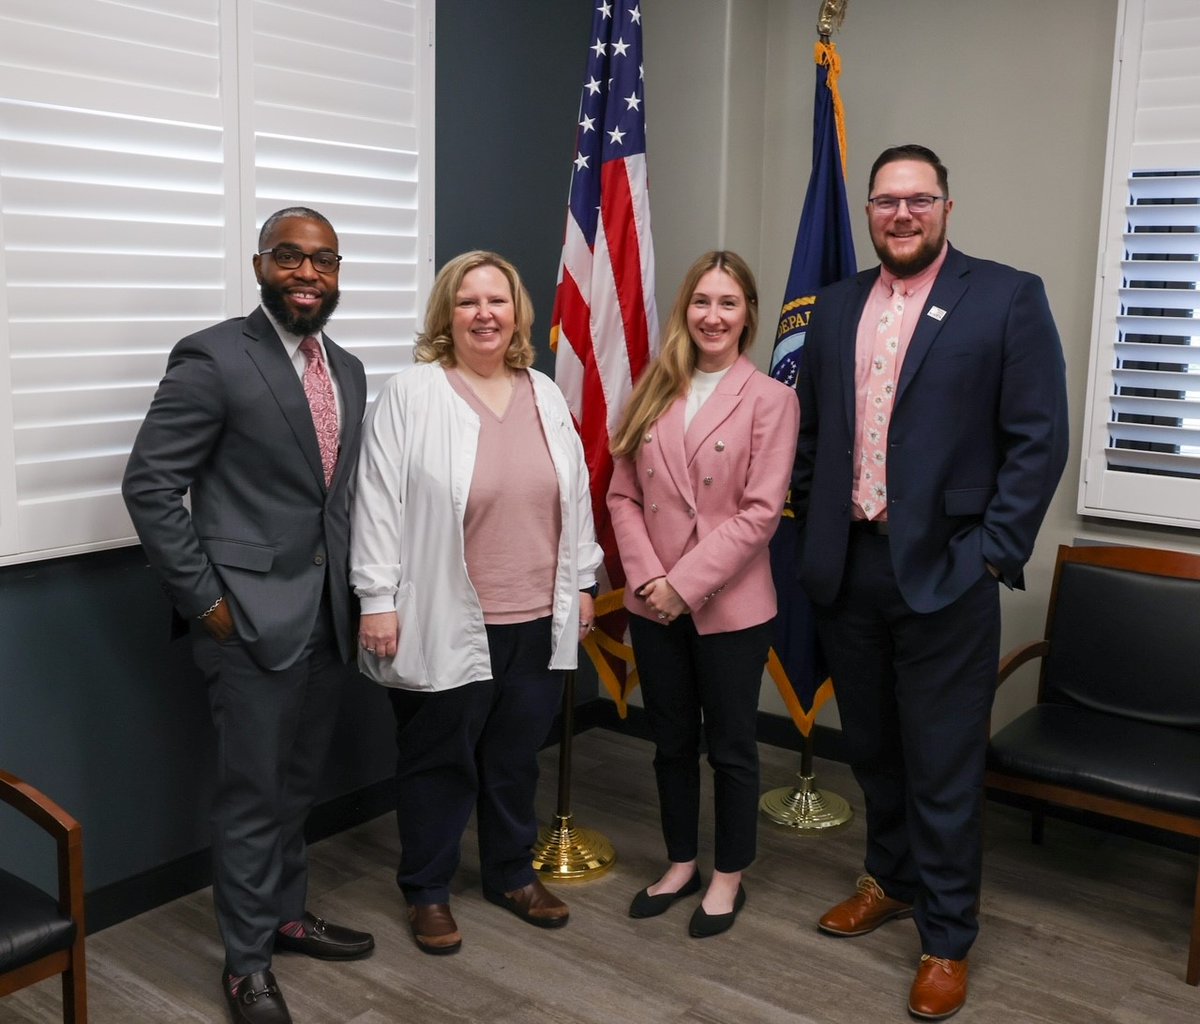 Thank you to everyone who wore pink in observance of Breast Cancer Awareness Month! Let's not only raise awareness but emphasize the importance of scheduling regular mammograms, conducting self-exams, and adopting a healthy lifestyle. #BreastCancerAwareness #VeteranHealthcare